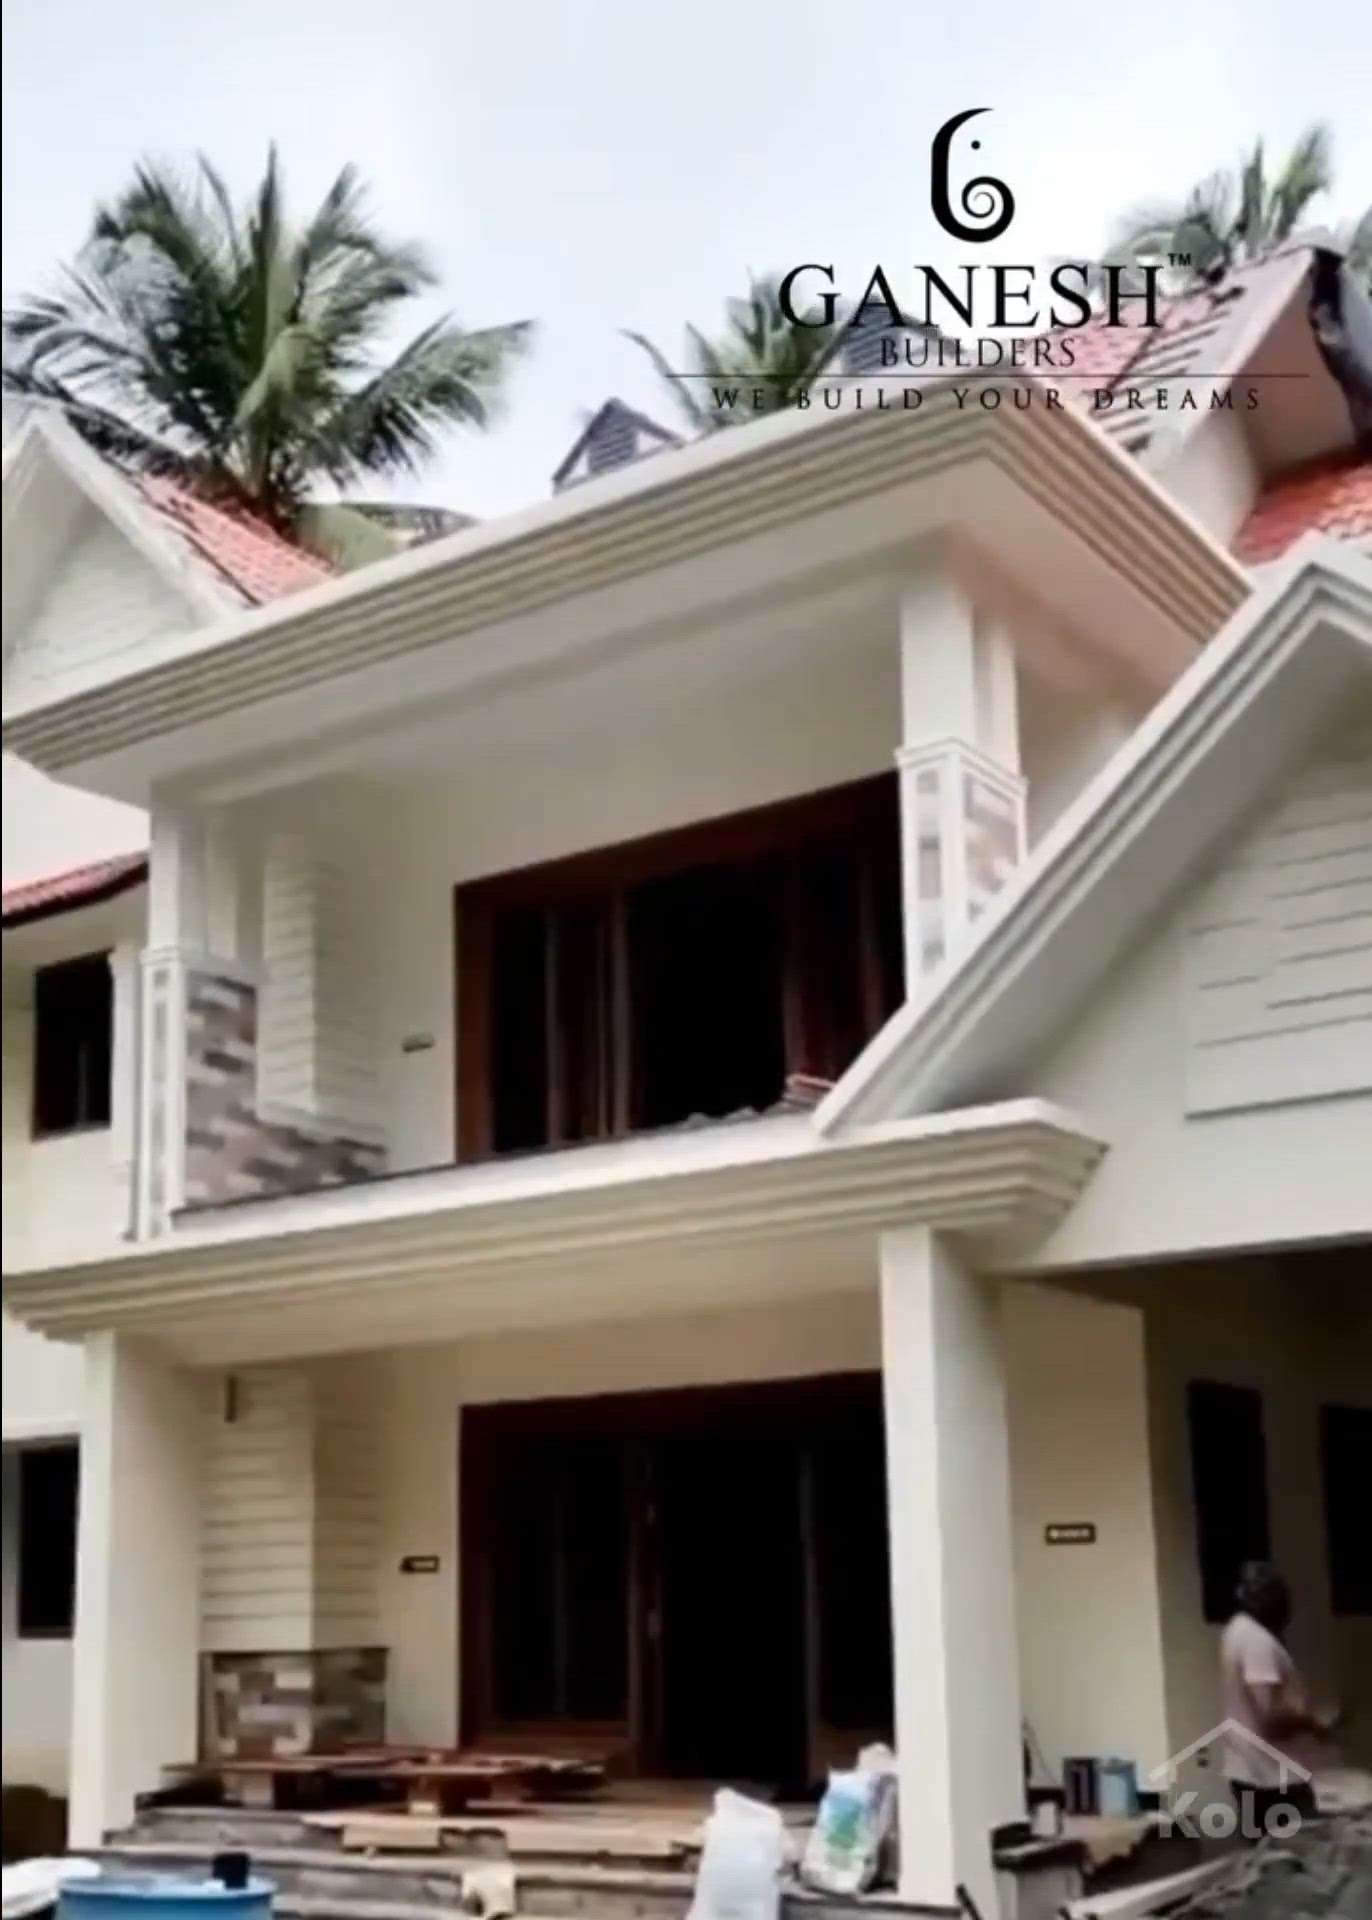 3300/4 bhk/Fusion style
/double storey/Thrissur

Project Name: 4 bhk,Fusion style house 
Storey: double
Total Area: 3300
Bed Room: 4 bhk
Elevation Style: Fusion
Location: Thrissur
Completed Year: 2023

Cost: 1.17 cr